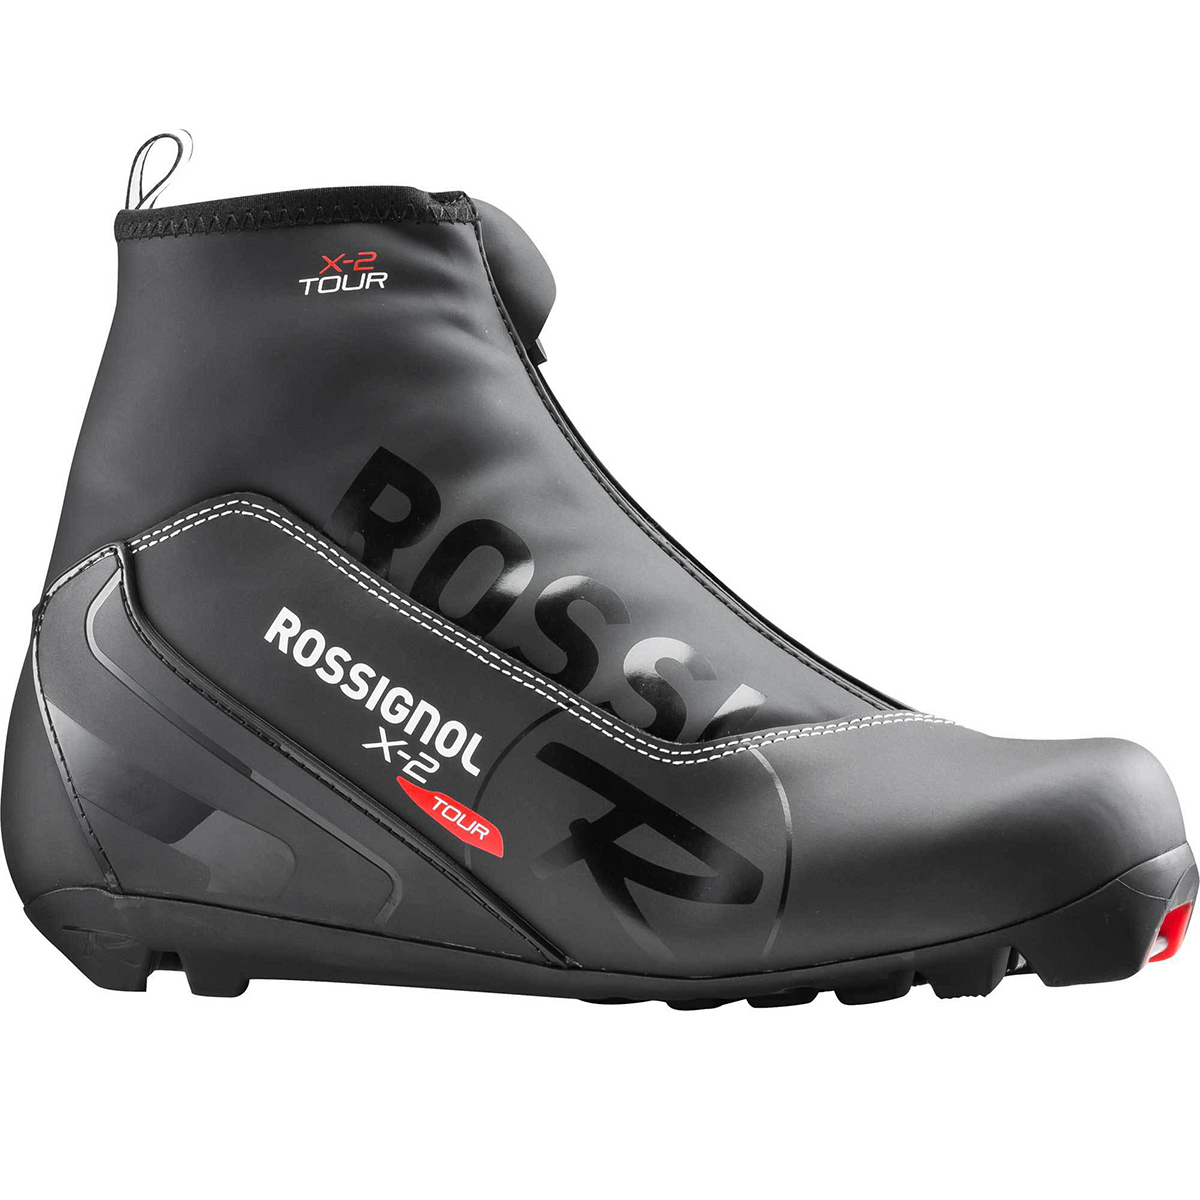 EAN 3607682205715 product image for Rossignol X2 Cross-Country Ski Boots | upcitemdb.com